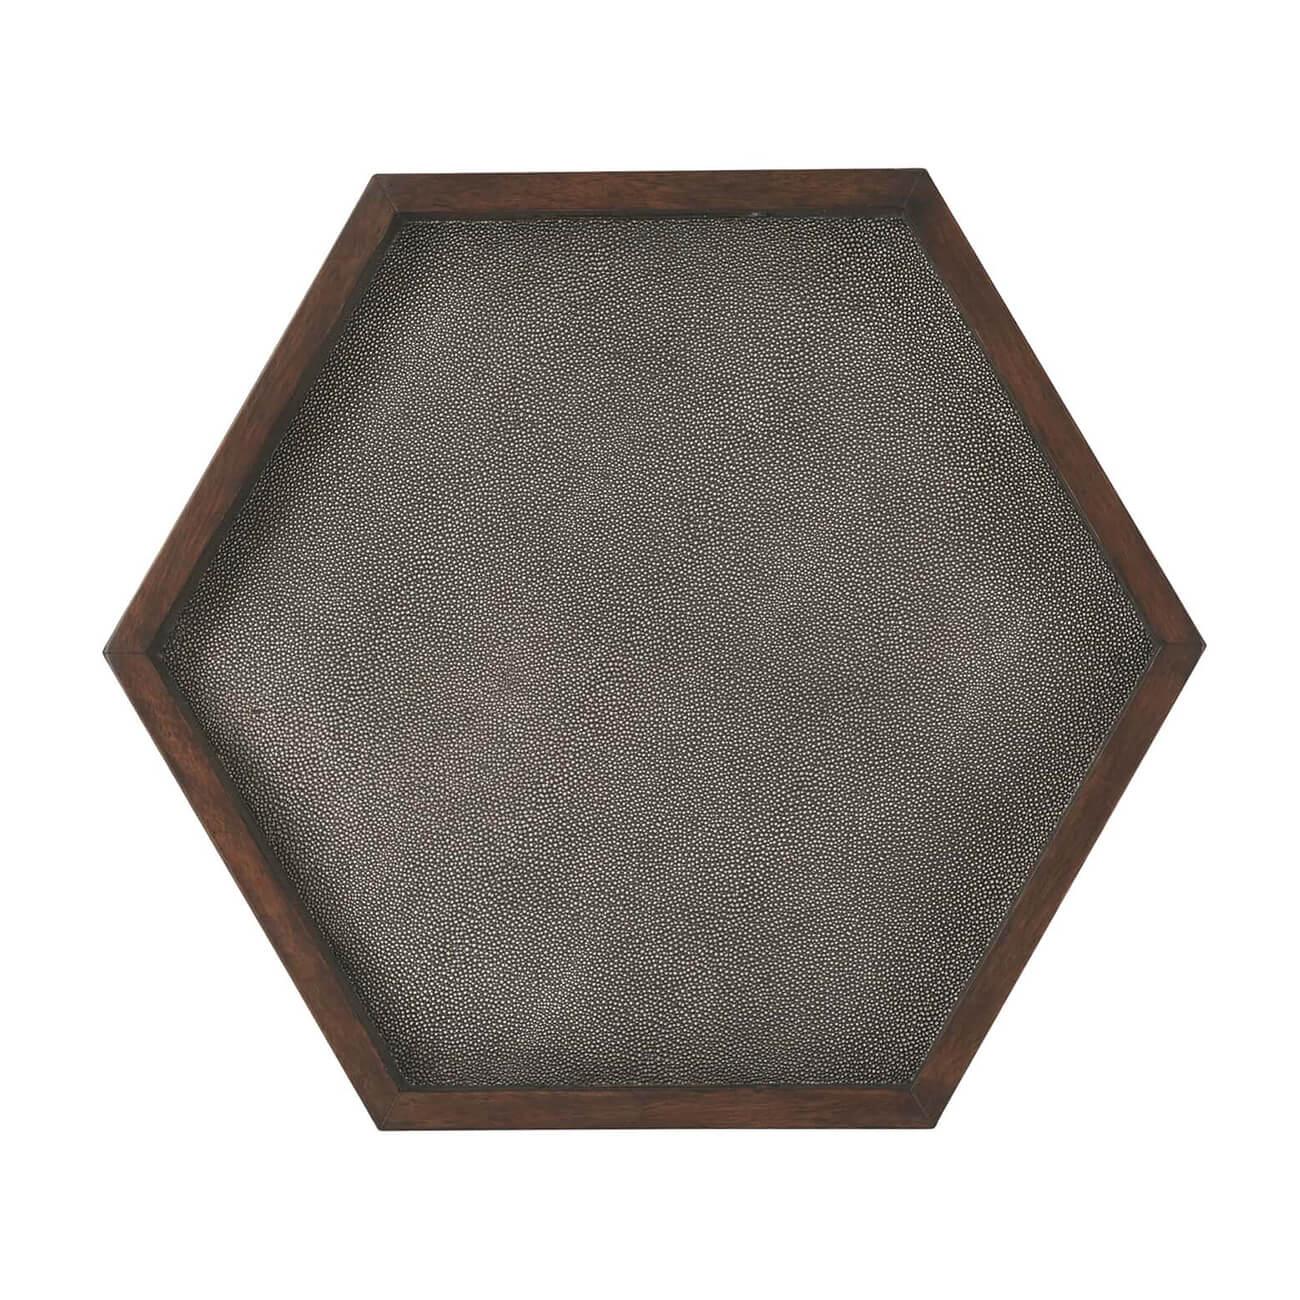 A Moroccan style faux shagreen wrapped hexagonal side table with pierced handle tray top, shagreen embossed leather sides, and a polished wood edge with keyhole form arches around the sides.

Dimensions: 23